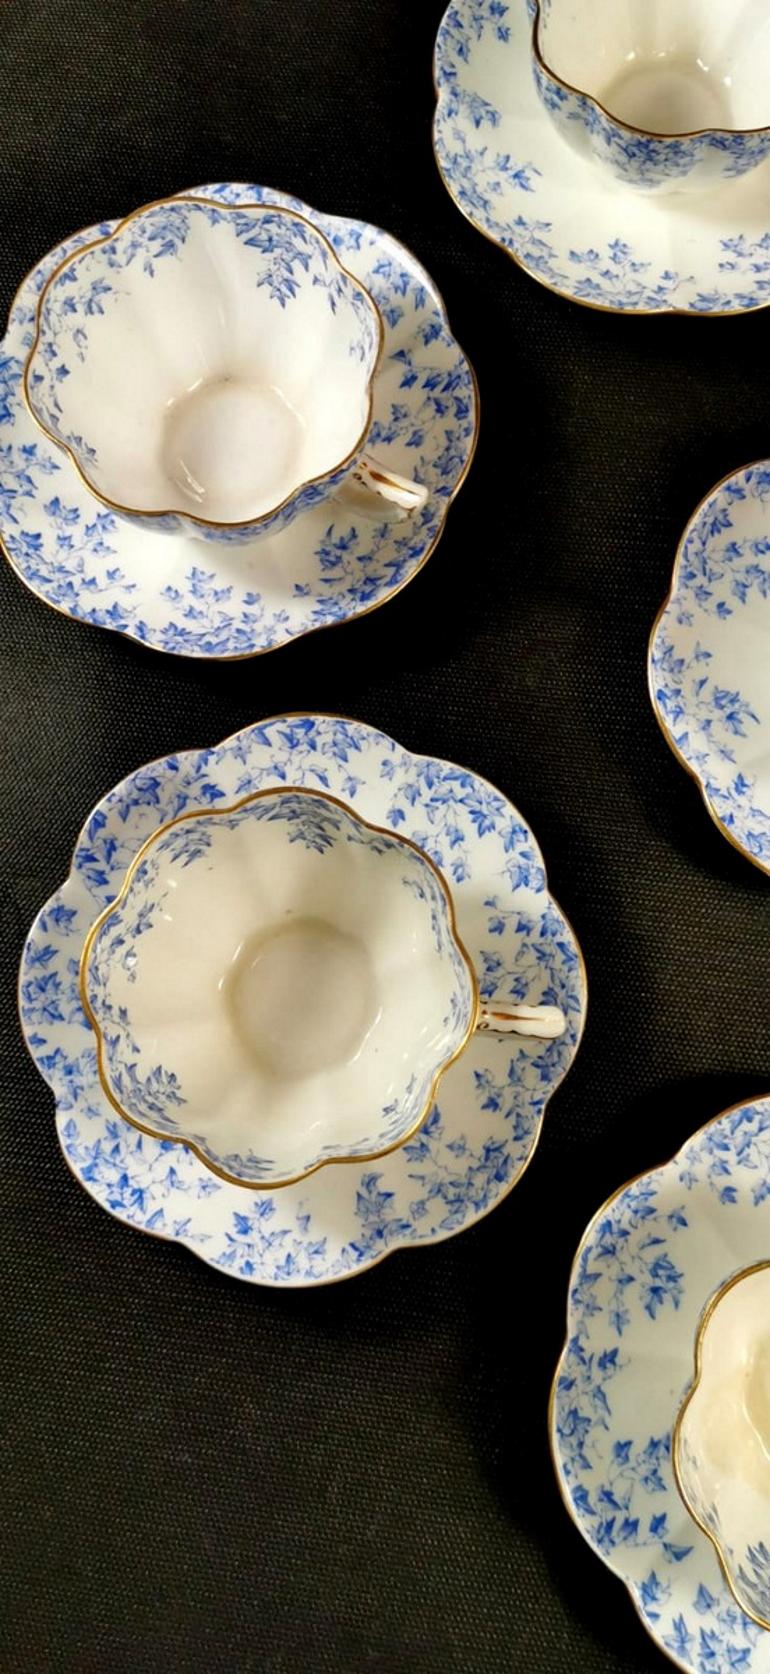 Staffordshire Porcelain Service English Coffee-Tea Cups with Plate 2